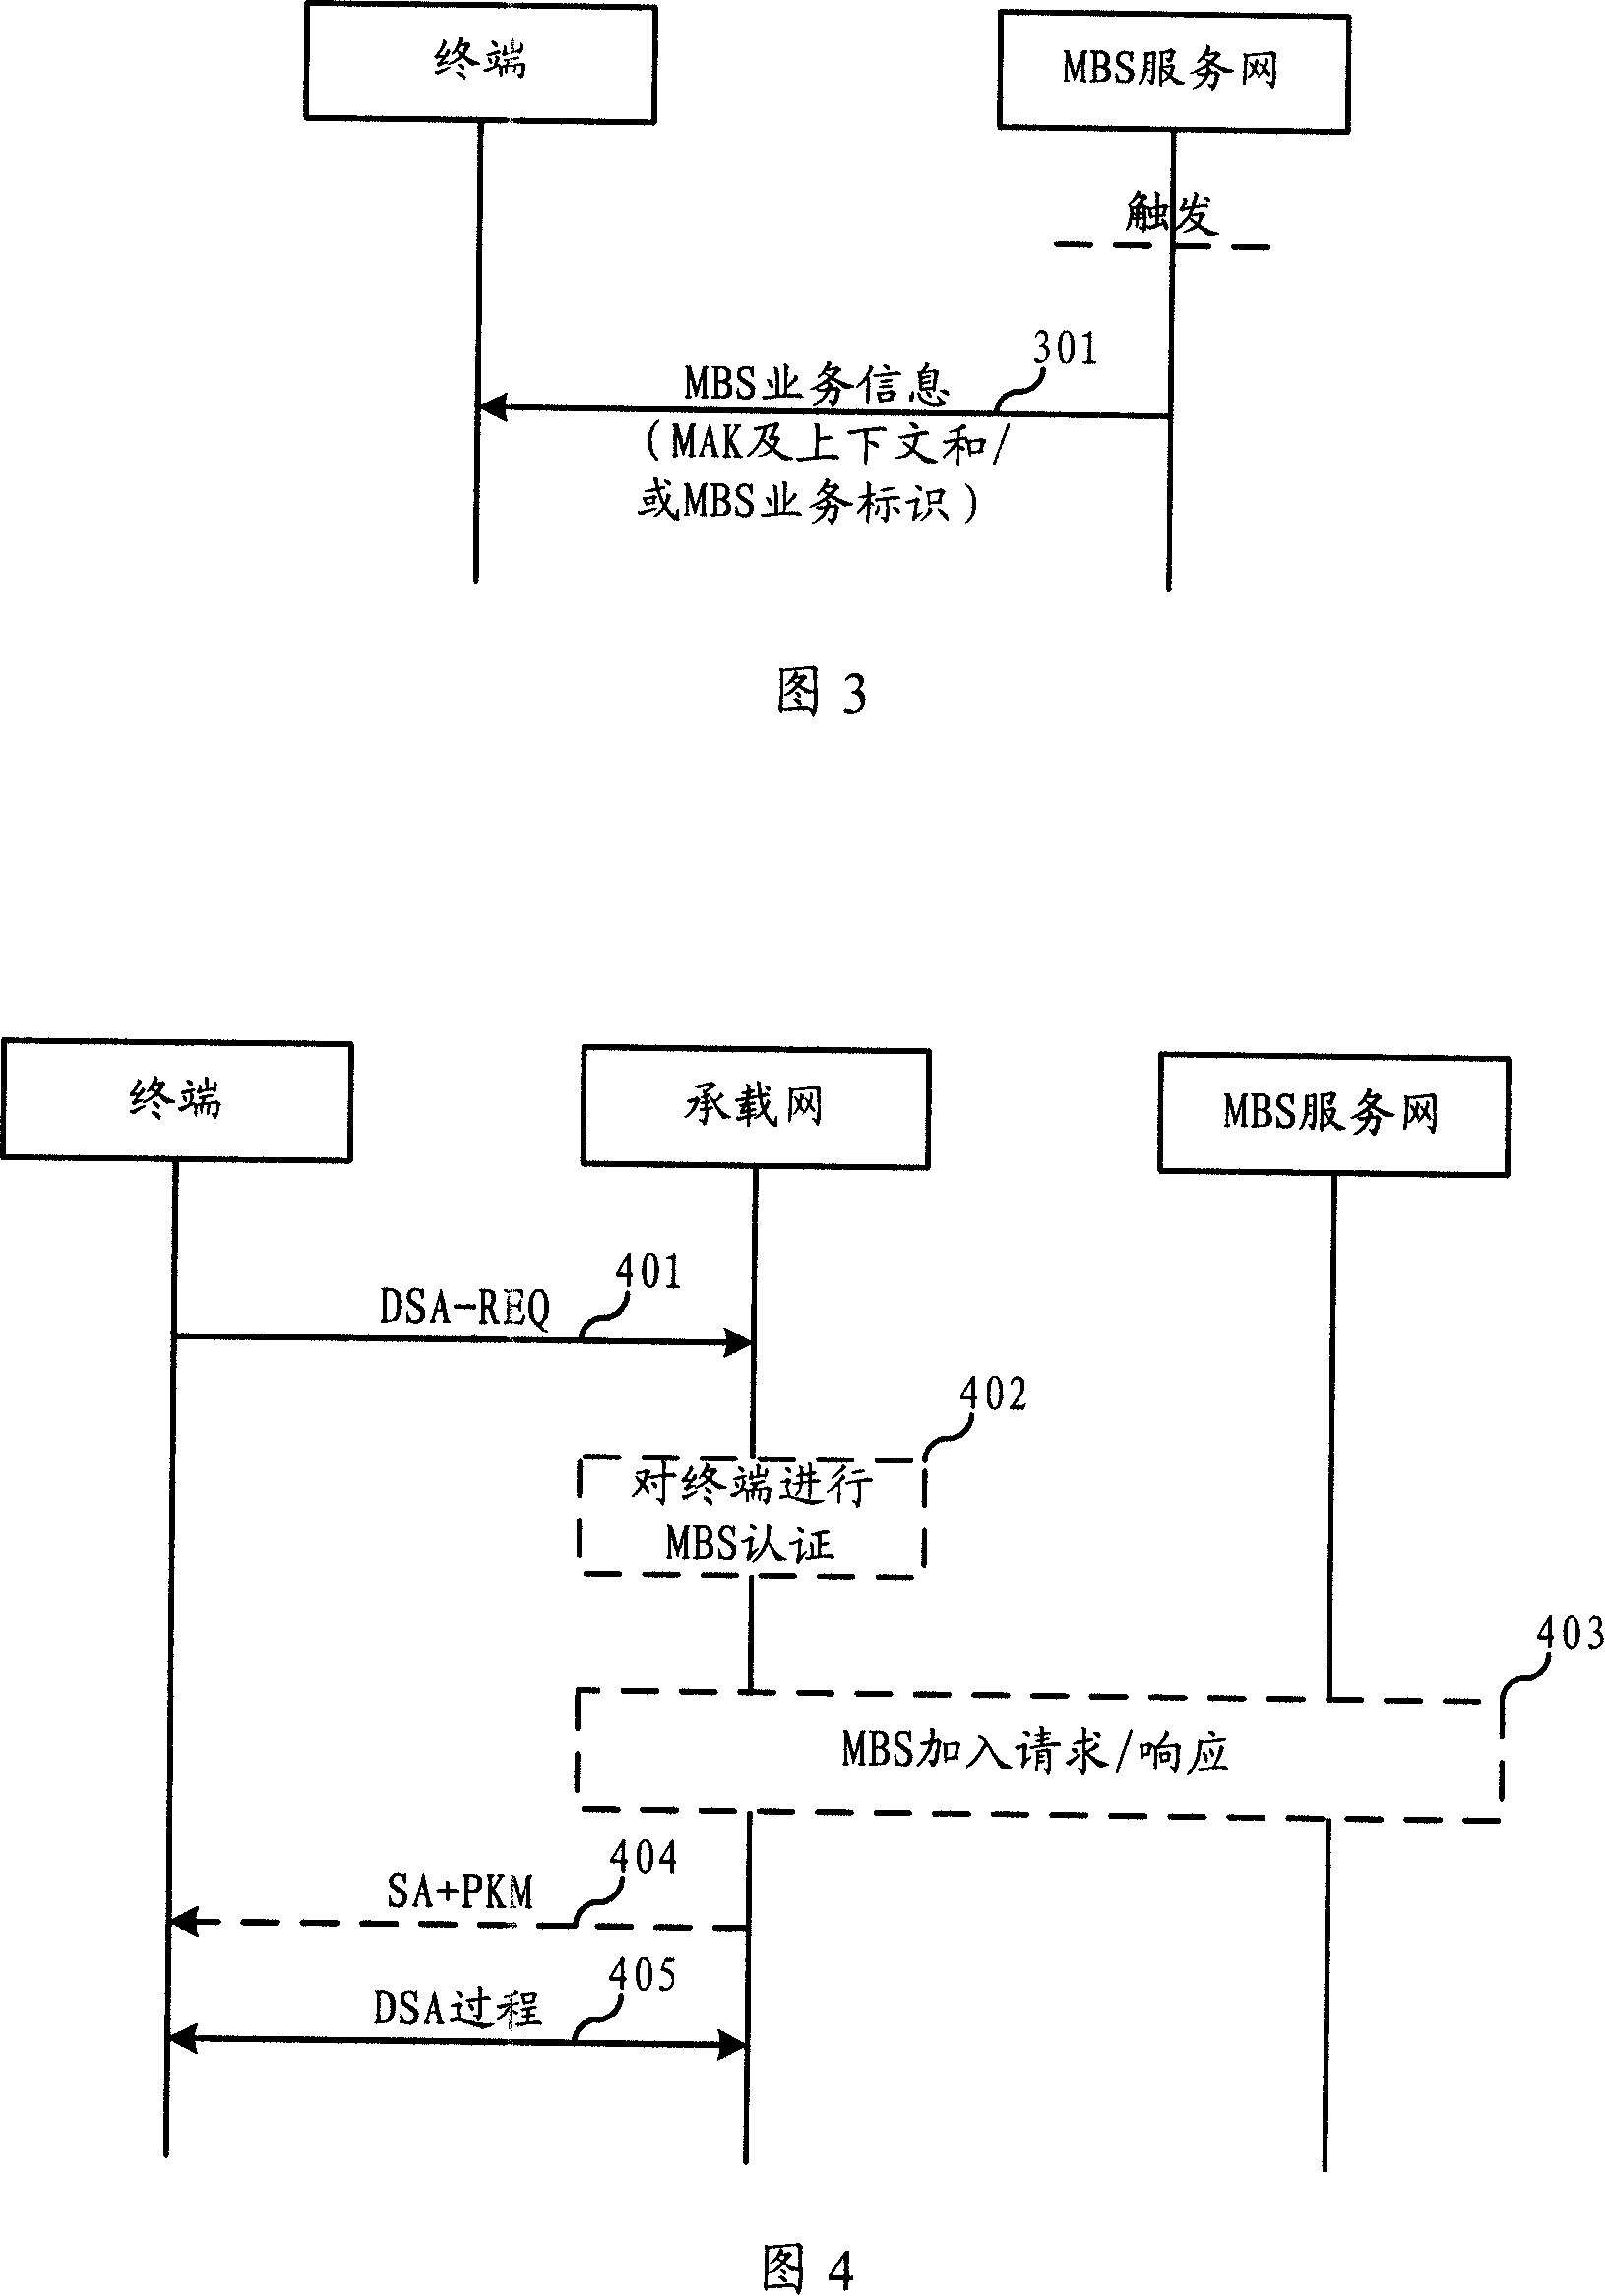 Method for adding multicast and broadcast service into communication system and terminal